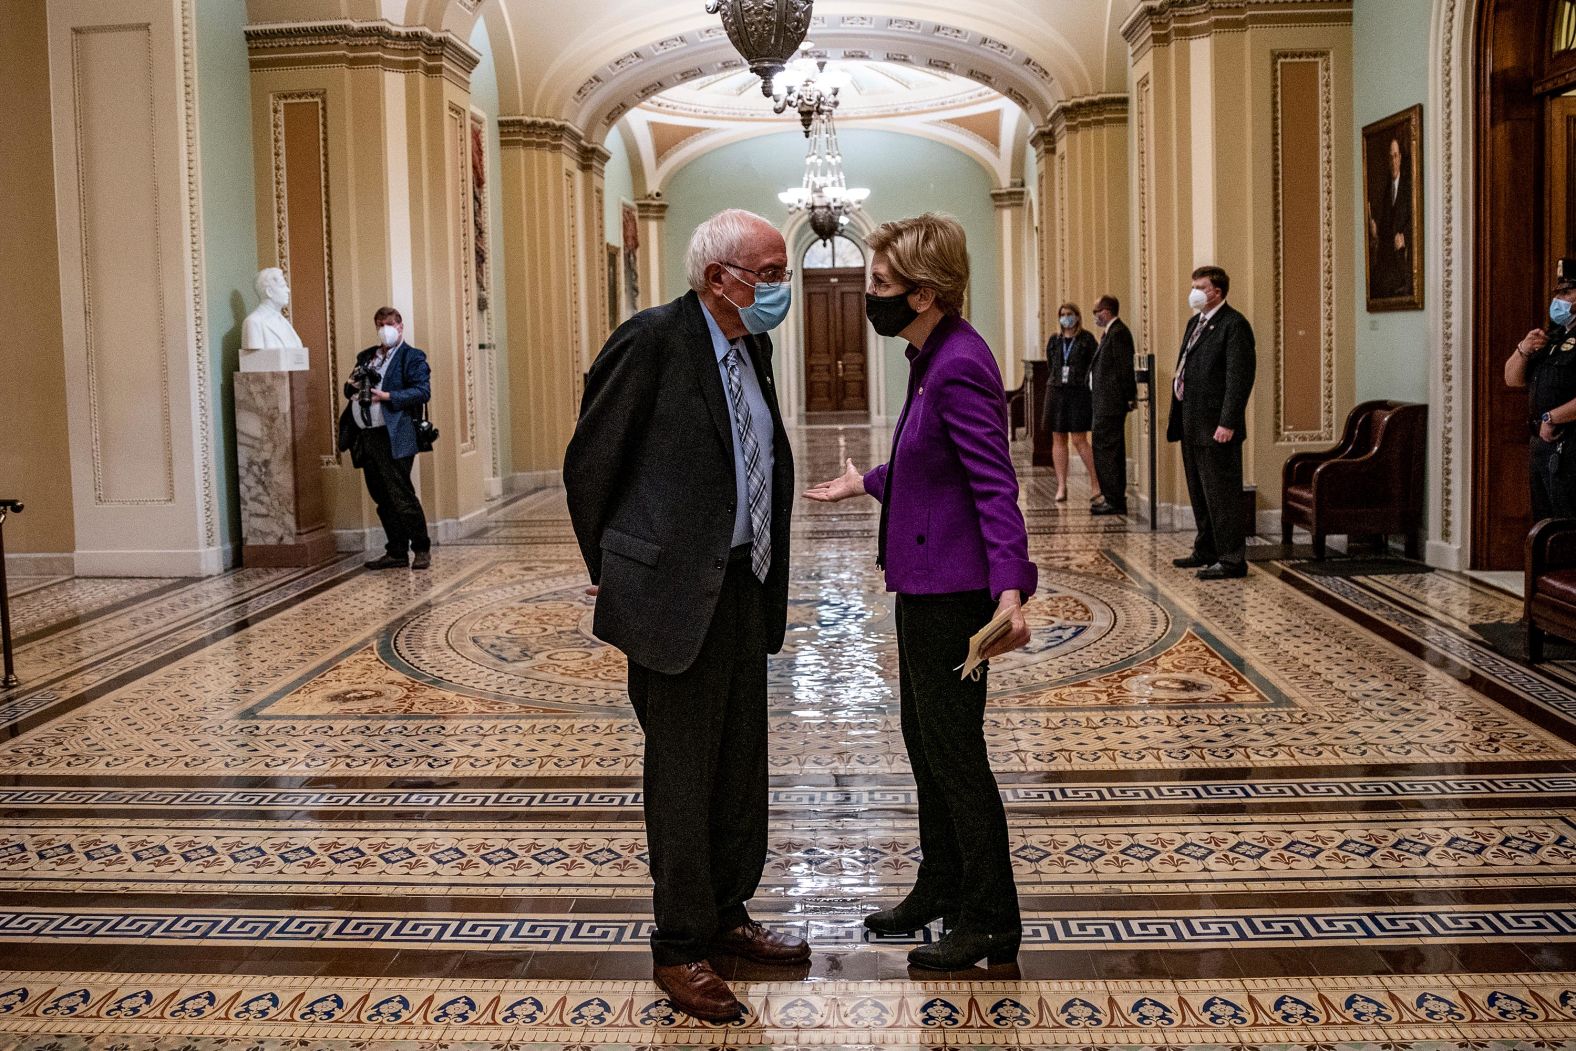 US Sens. Bernie Sanders and Elizabeth Warren chat in the Capitol after Biden's speech. Both competed with Biden last year for the Democratic nomination.